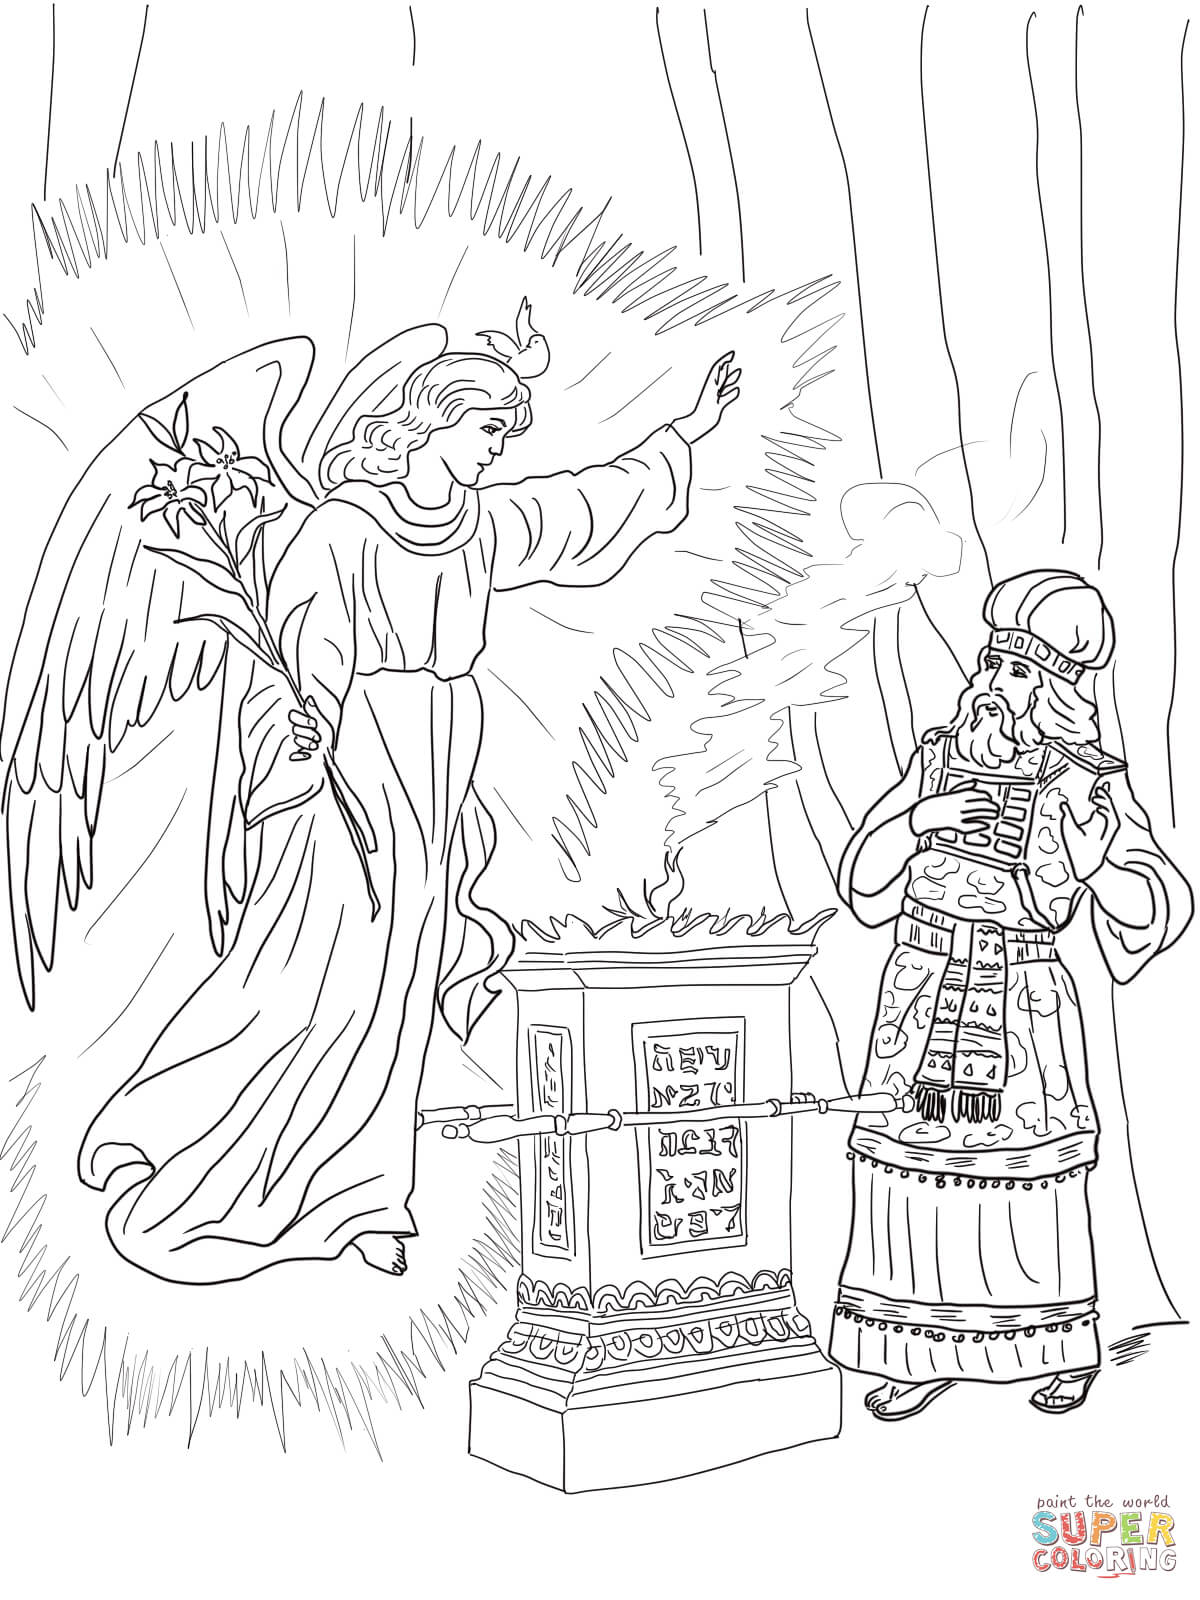 Angel Visits Zechariah Coloring Page Free Printable Pages Angels